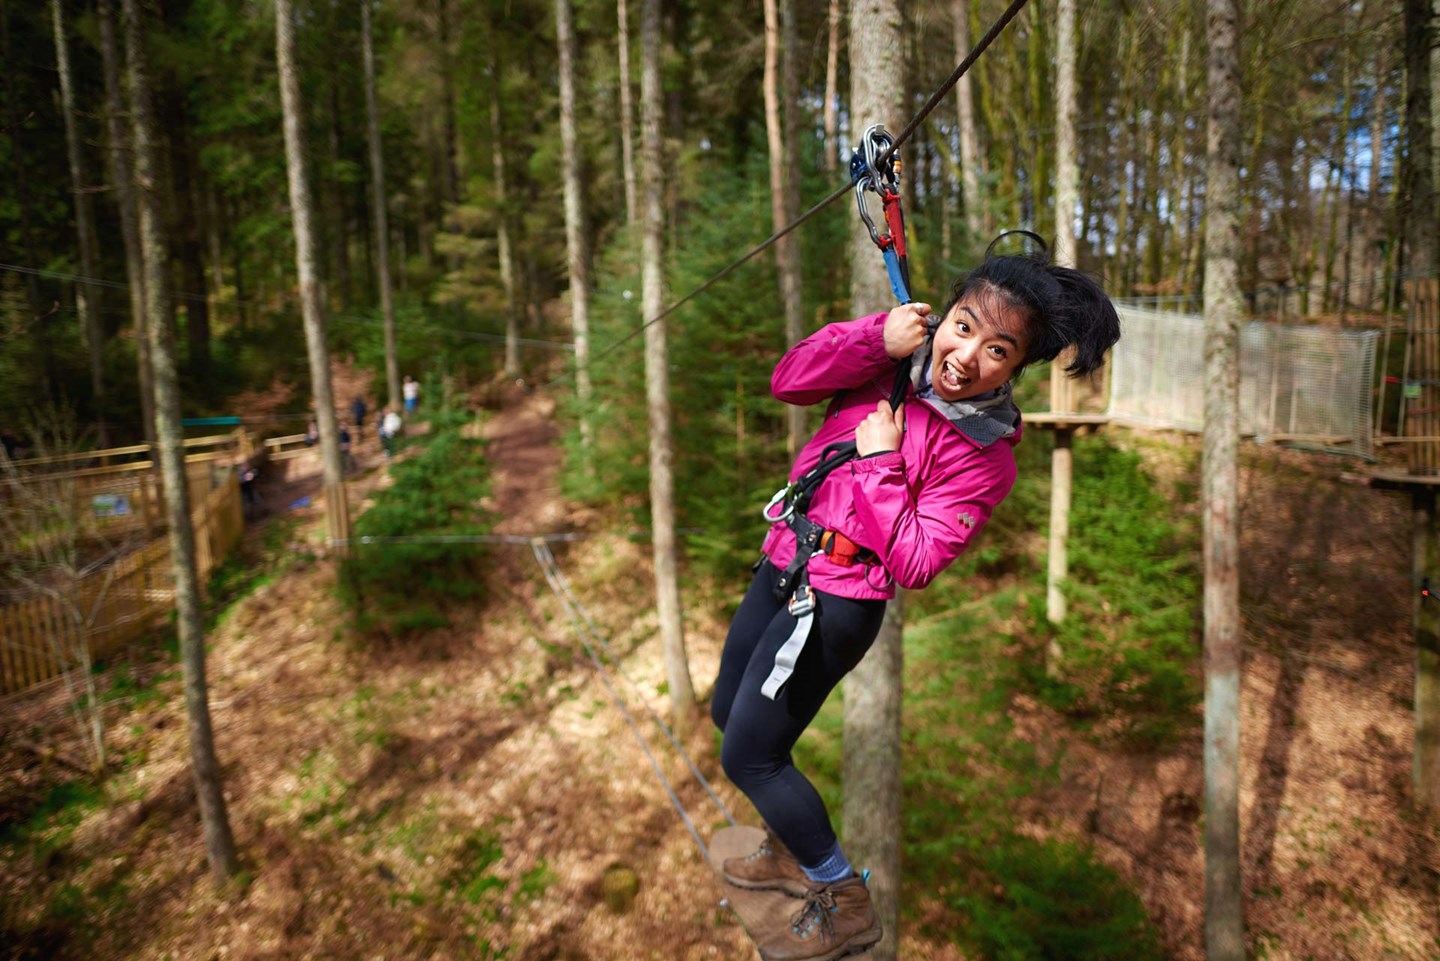 Young woman ziplines across forest screaming happily